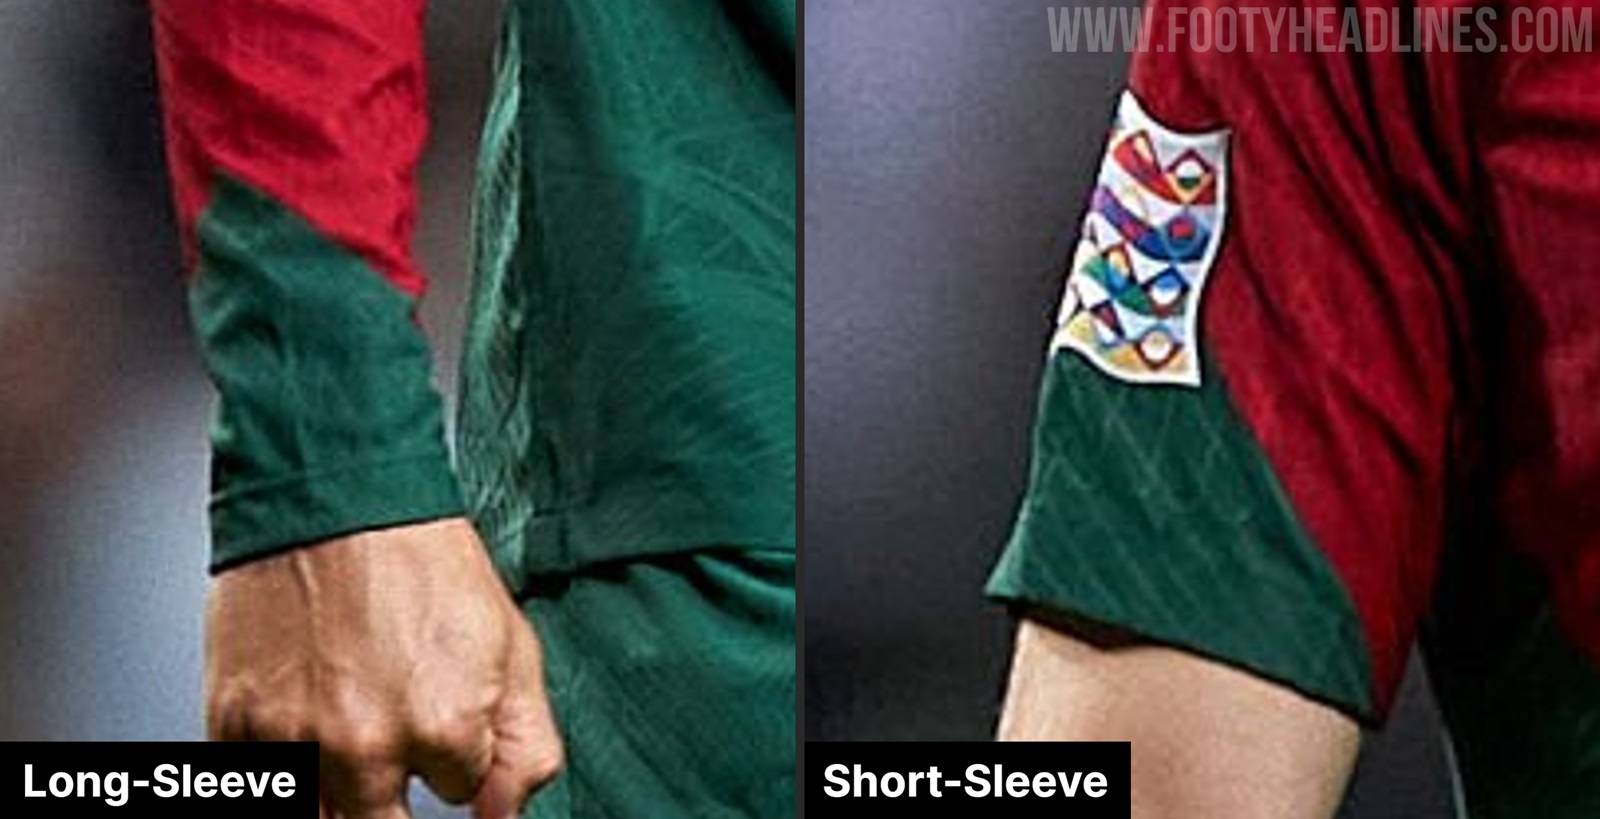 FIFA Forbid Gorgeous Long-Sleeve Portugal 2022 World Cup Home Kit ...